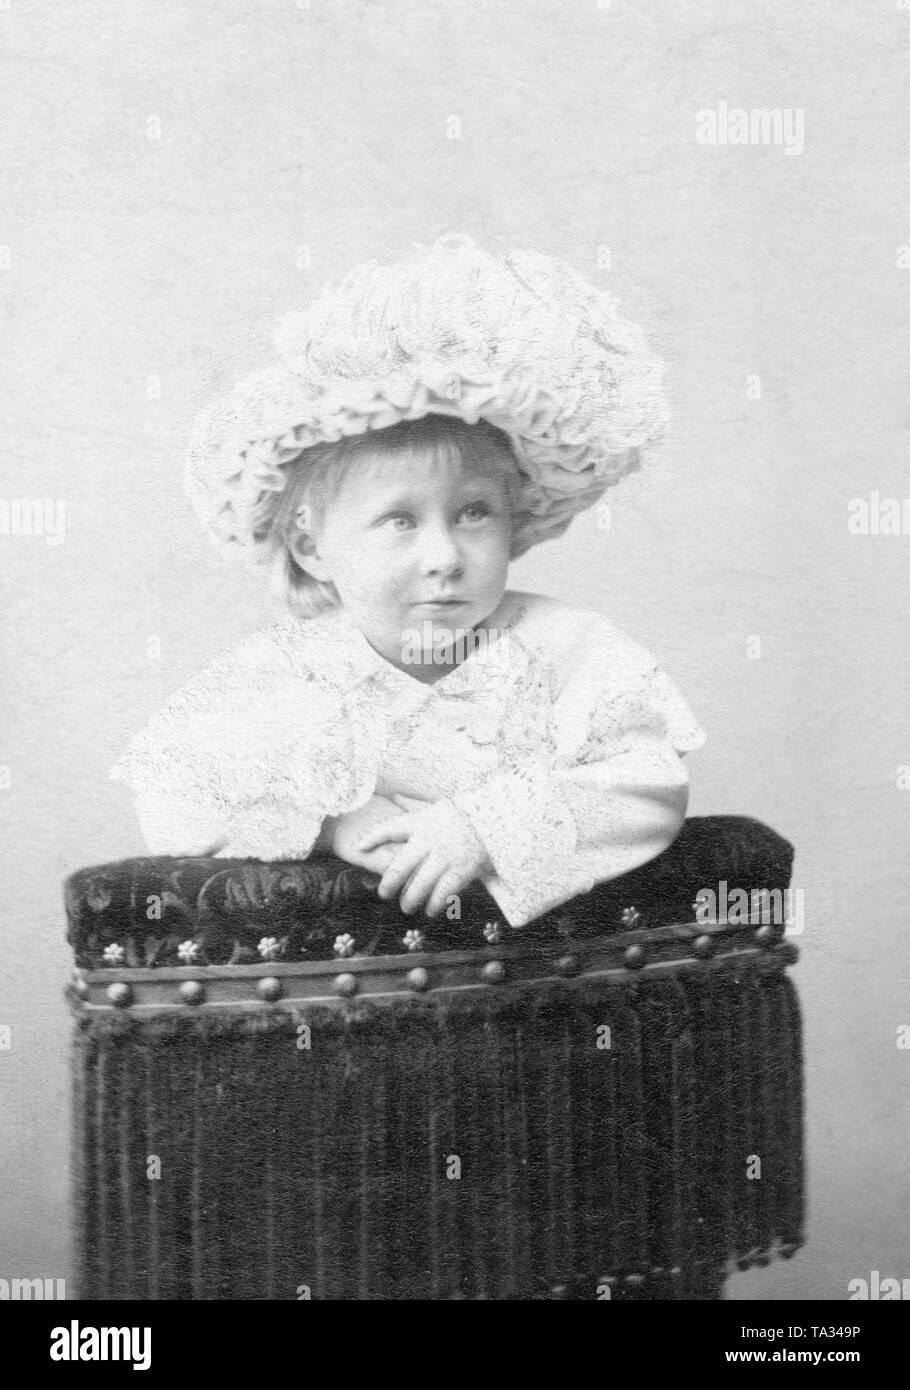 The picture shows the crown prince as a toddler in a white dress on a chair. Stock Photo